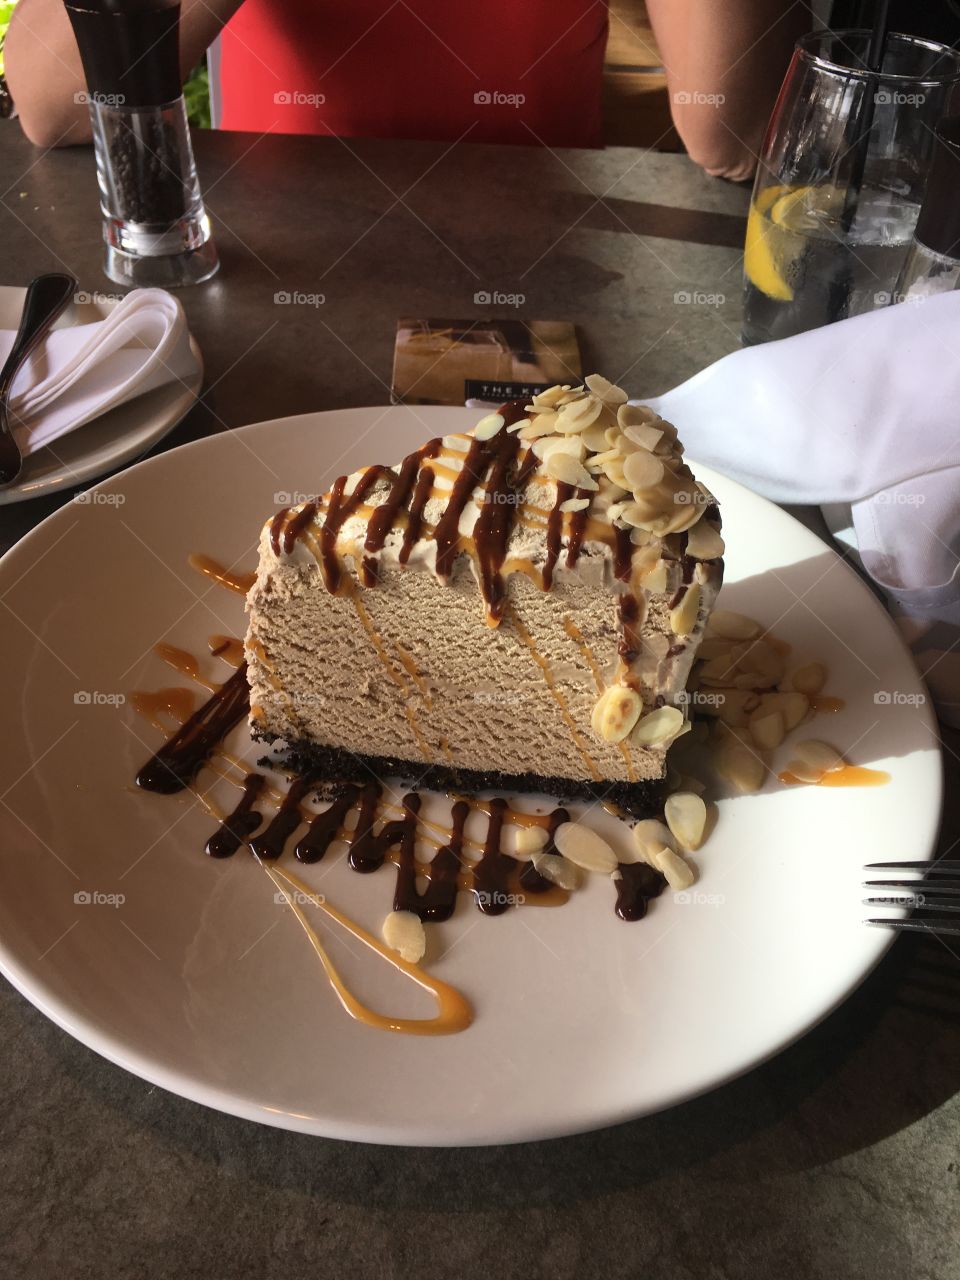 Billy Miner Pie from The Keg 🤤